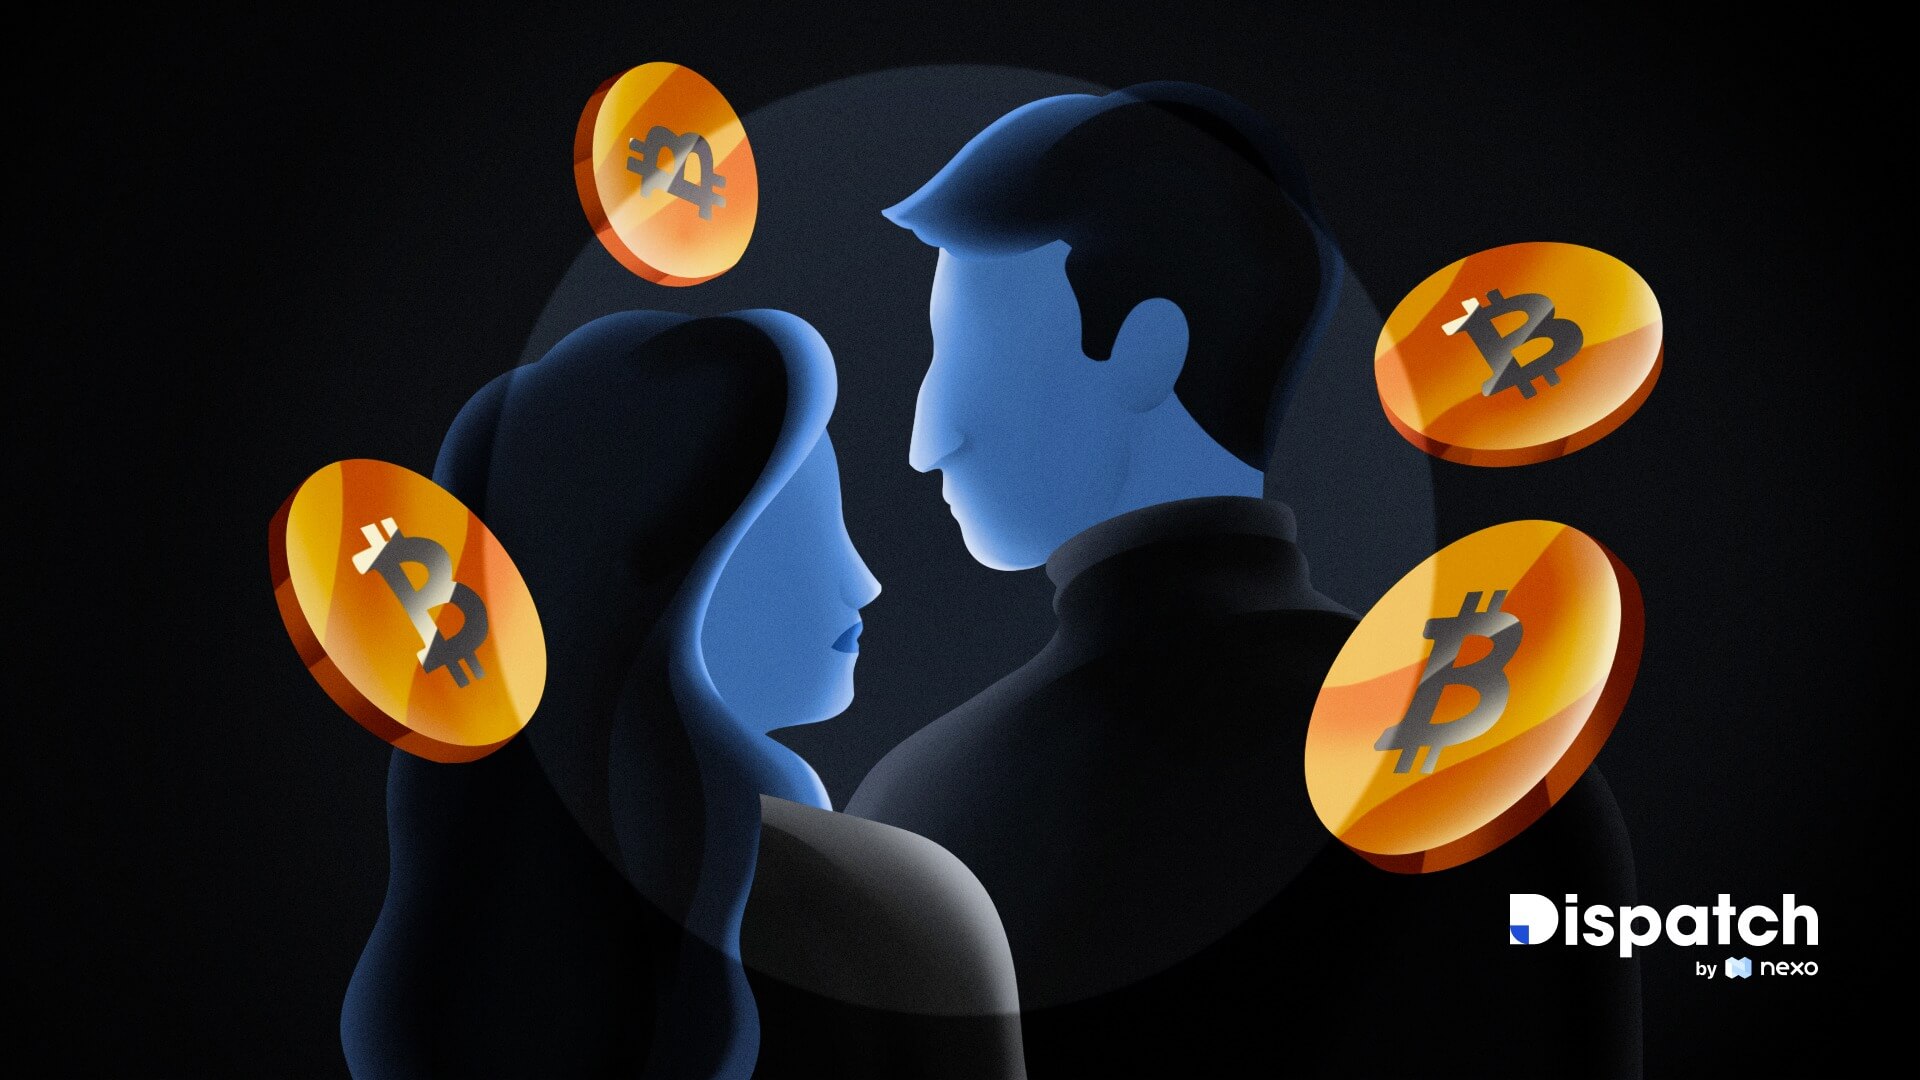 Dispatch #74: This V-Day – A Couple’s $3.6B in Stolen BTC